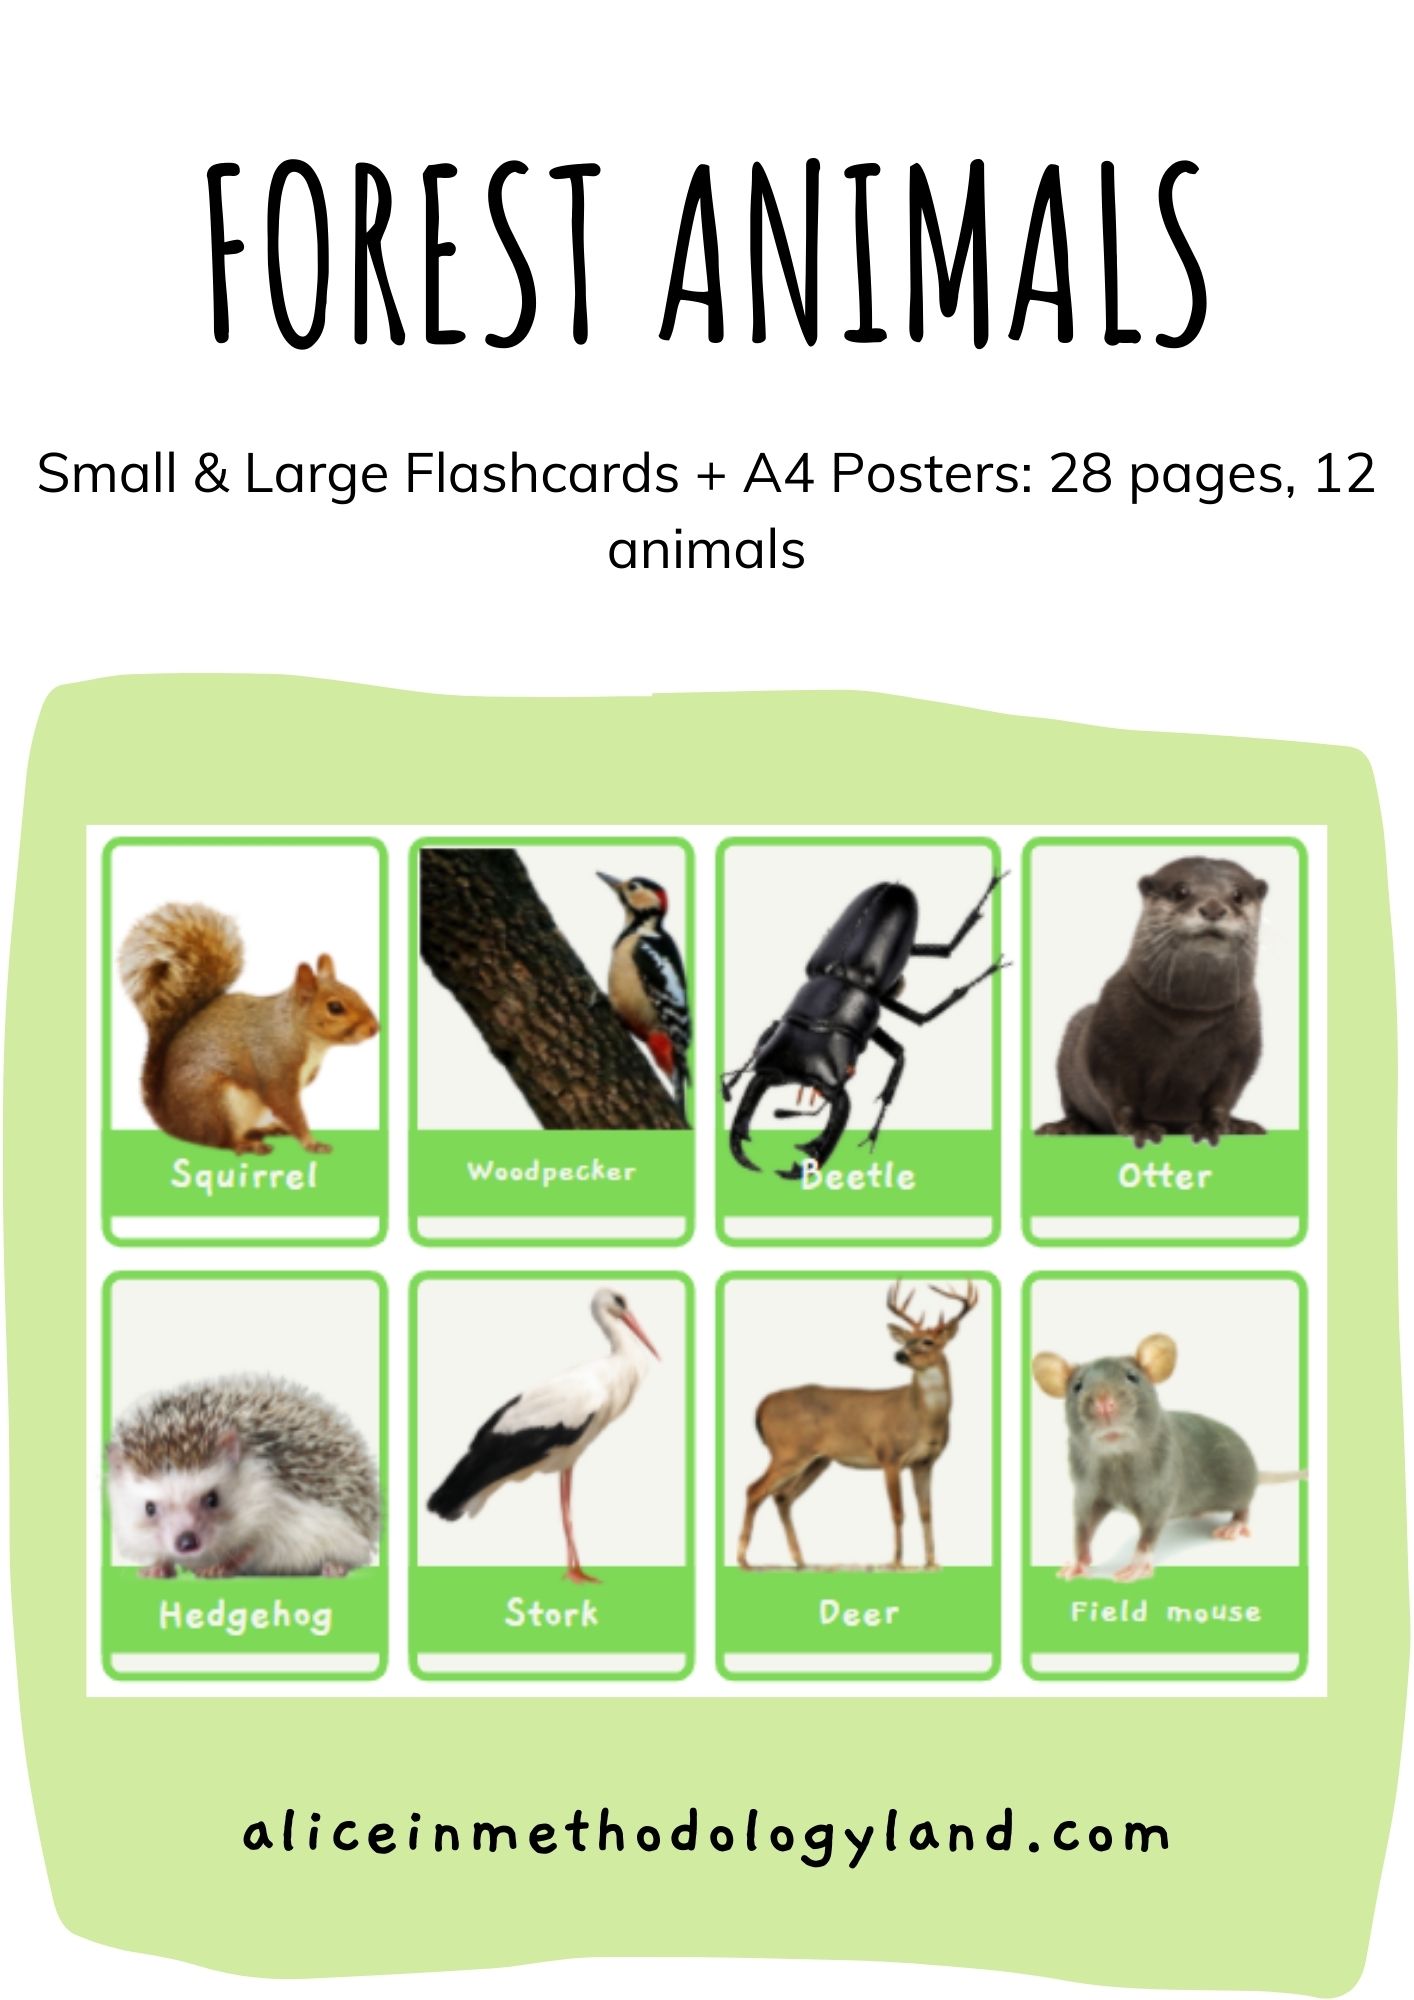 🌳 Forest animals: Small & Large Flashcards + A4 Posters ⋆ Discover  Methodologyland ✨